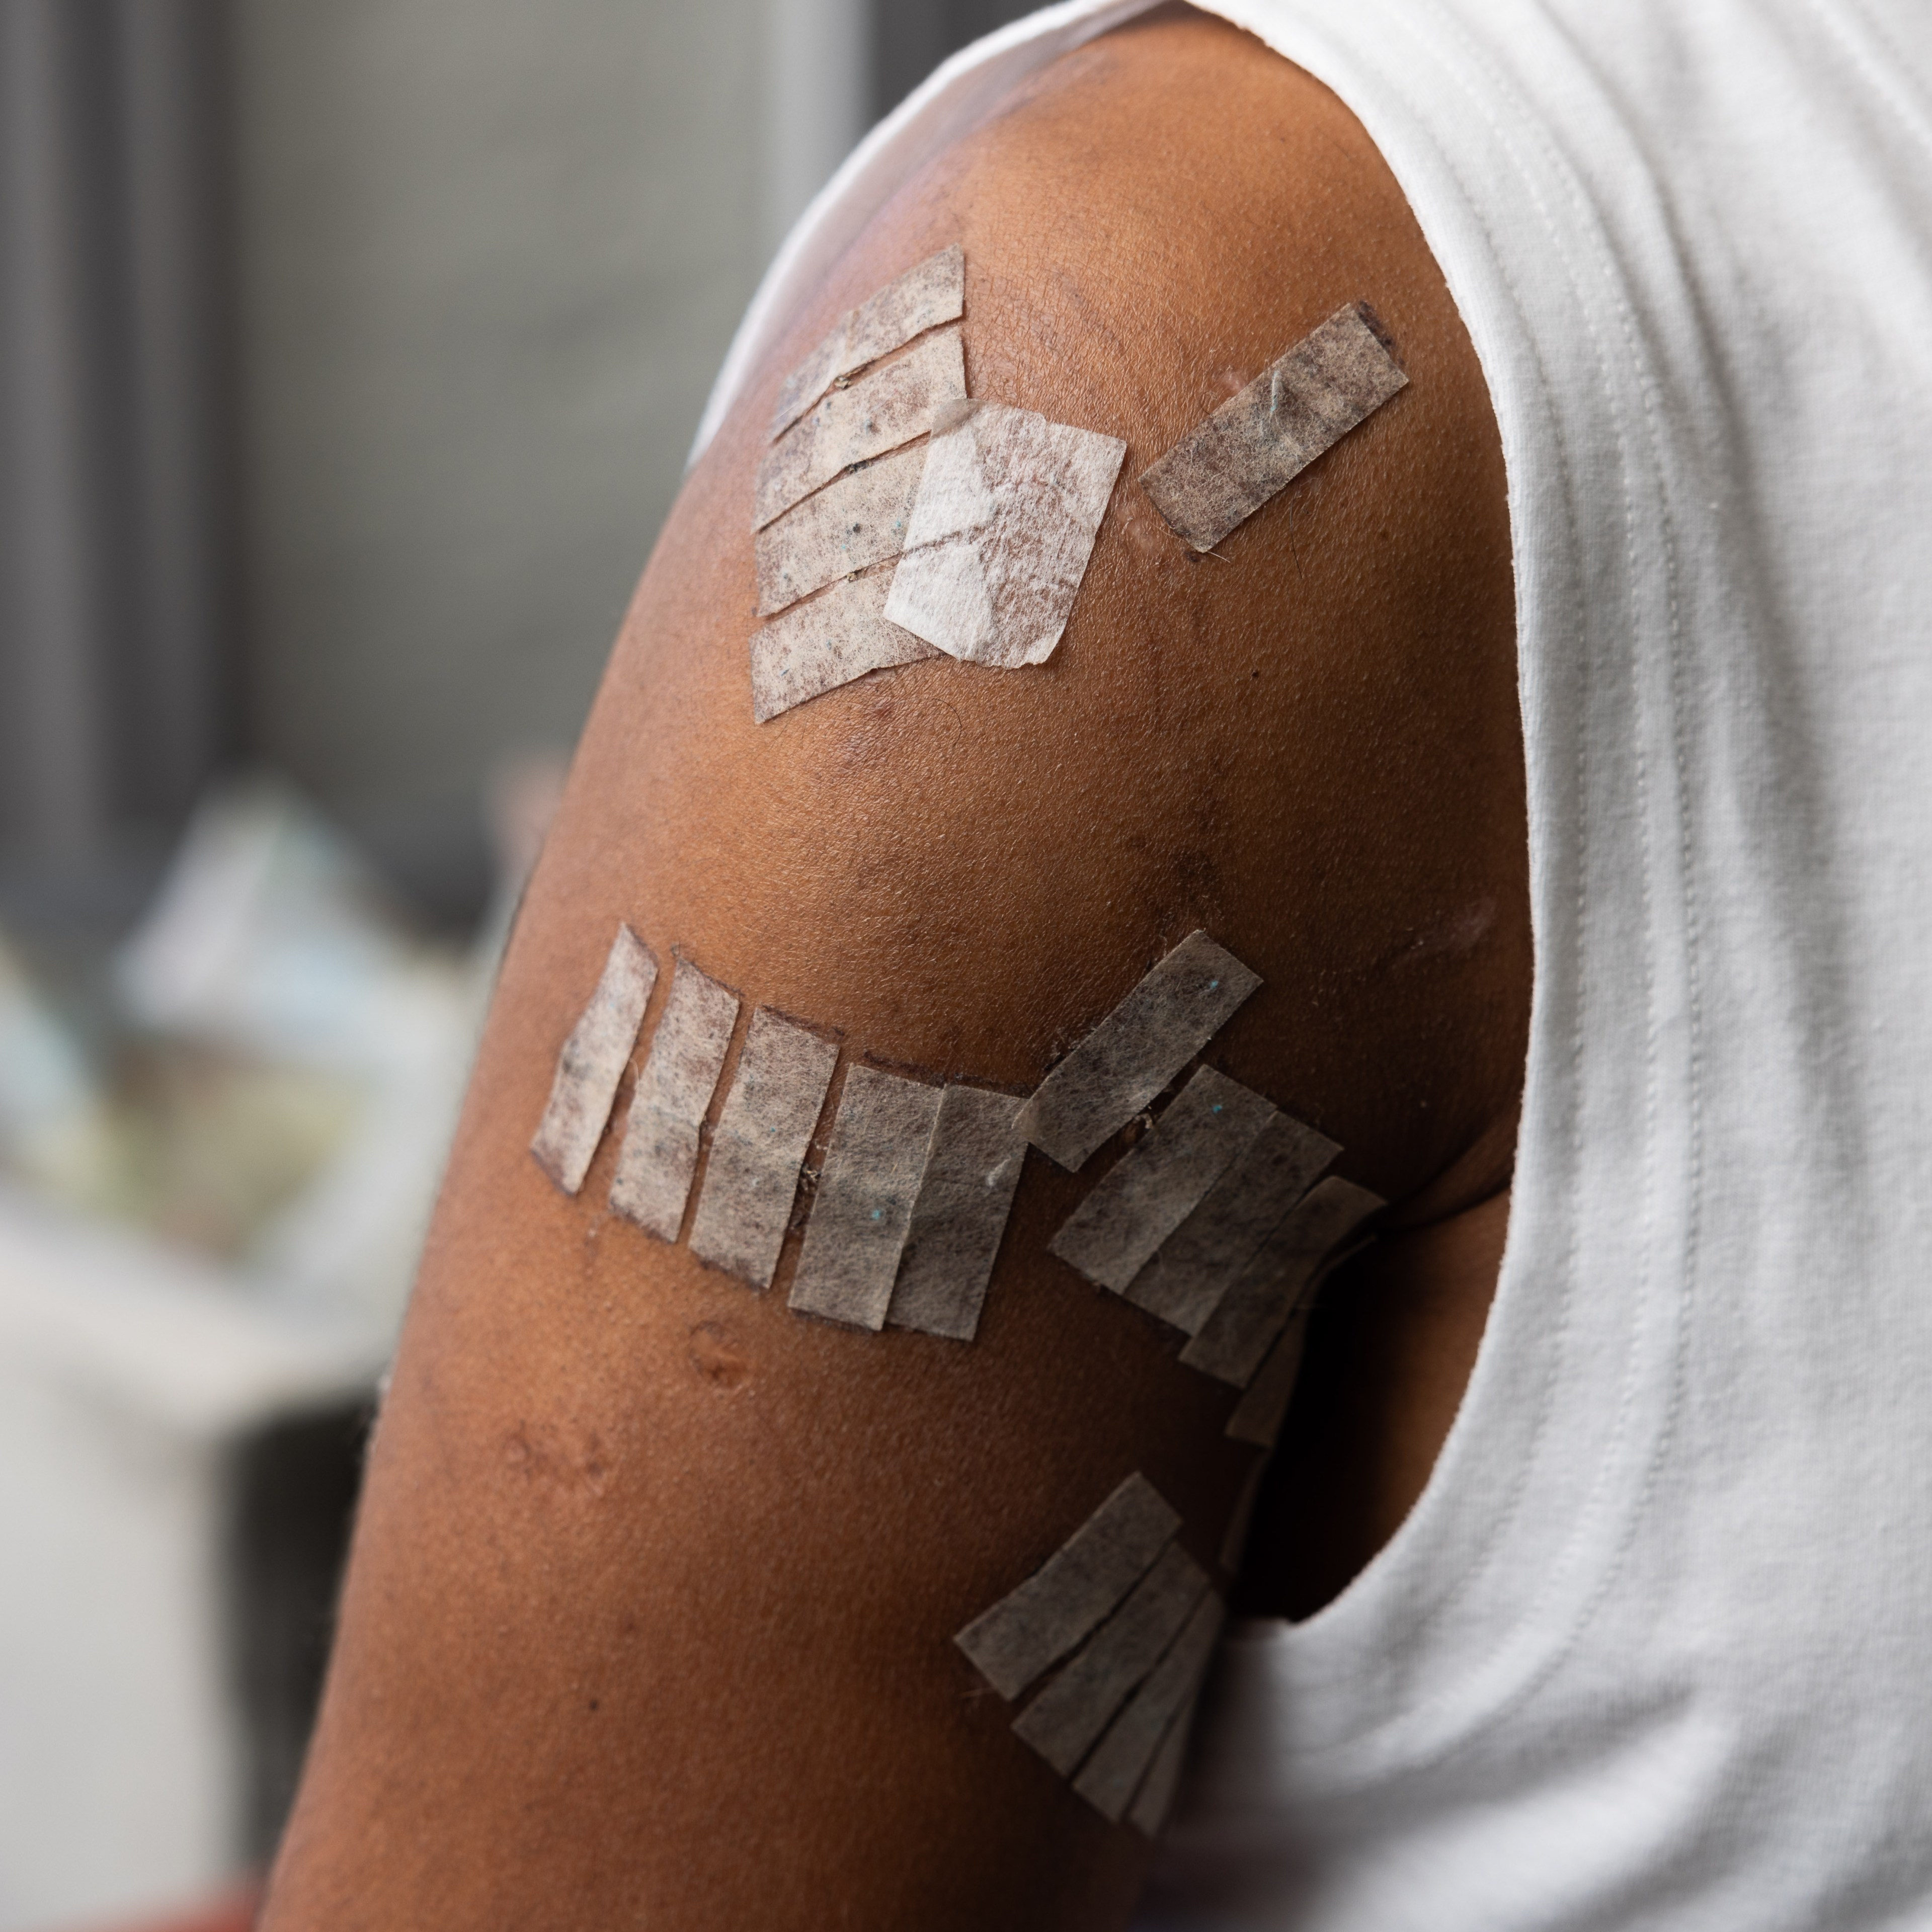 A person's arm with multiple small bandages in varying orientations covers the upper arm, which is clad in a sleeveless white shirt.